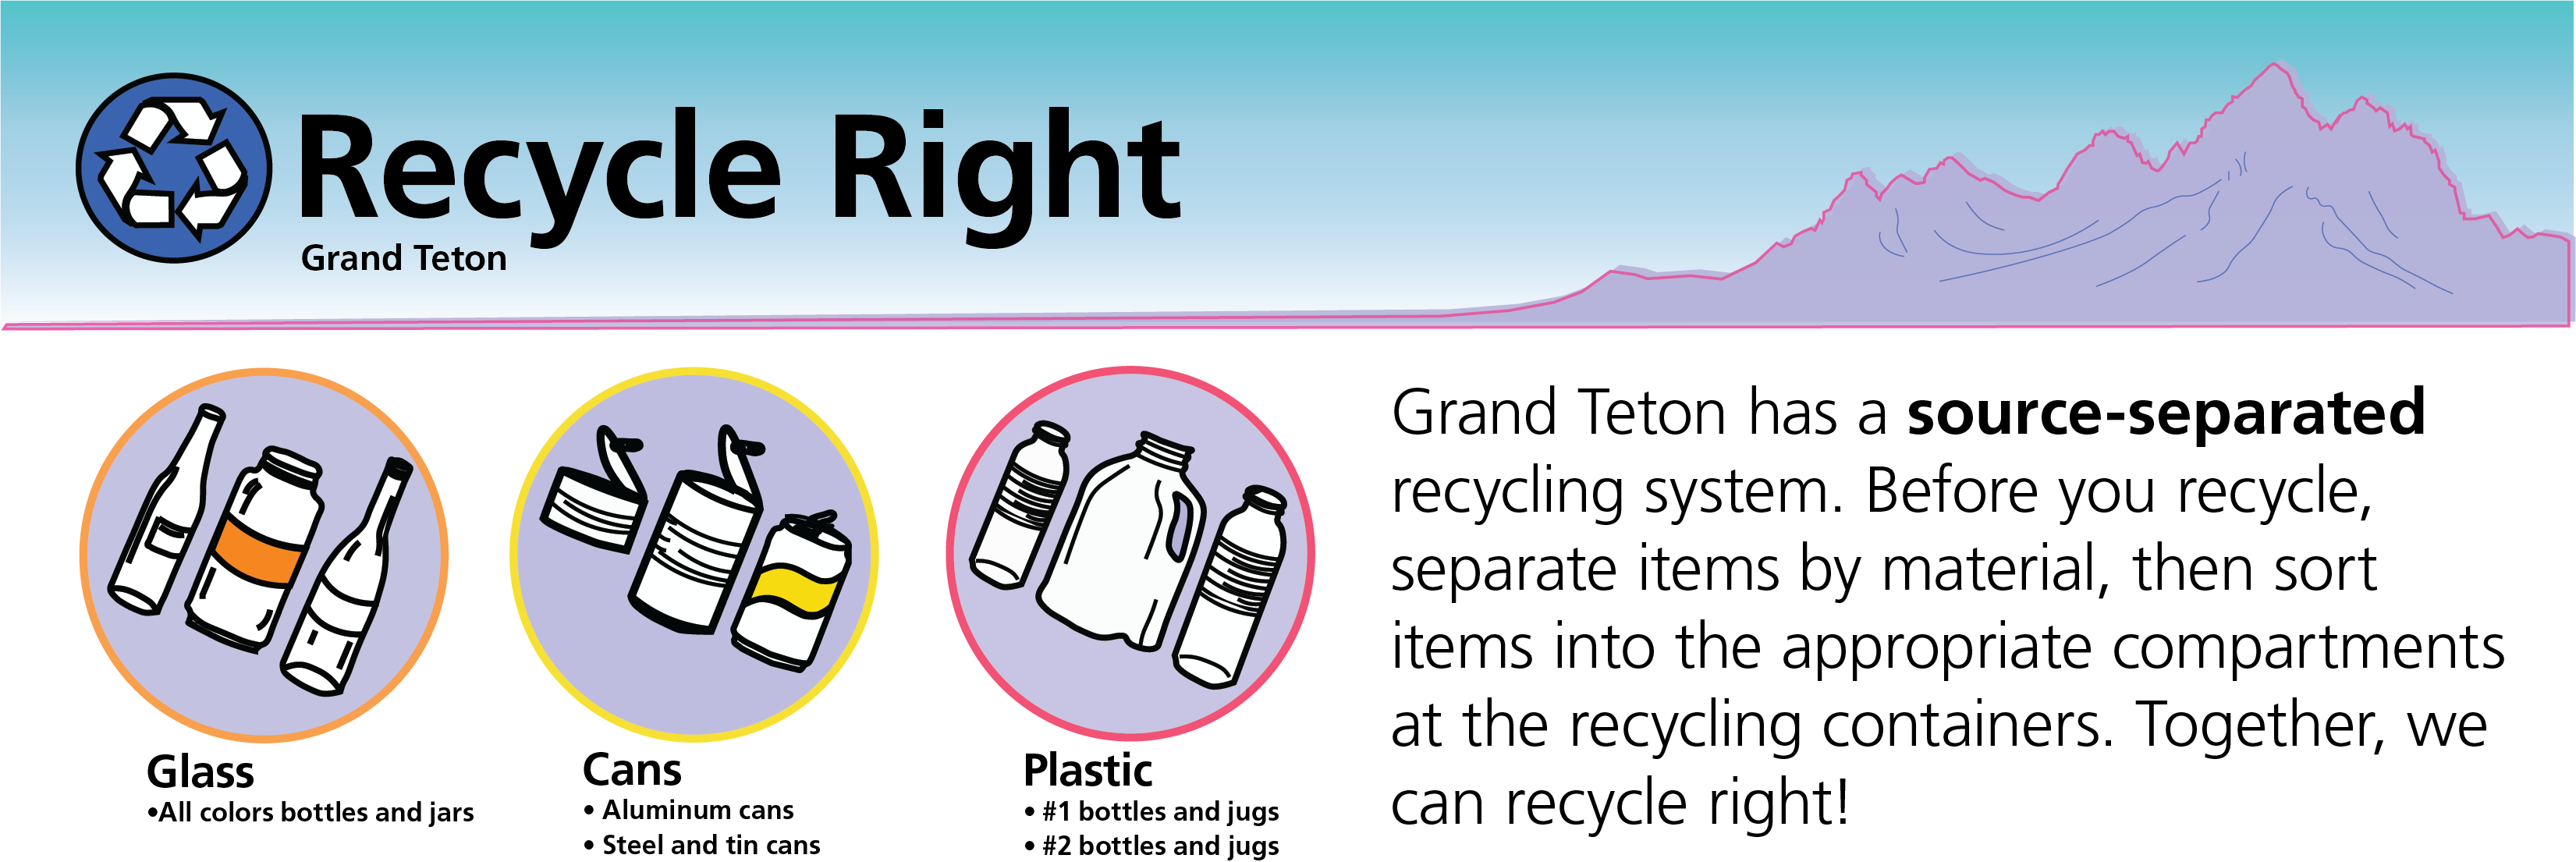 Recycle Right Grand Teton. Glass •All colors bottles and jars Cans • Aluminum cans • Steel and tin cans Plastic • #1 bottles and jugs • #2 bottles and jugs  Grand Teton has a source-separated recycling system. Before you recycle, separate items by materia